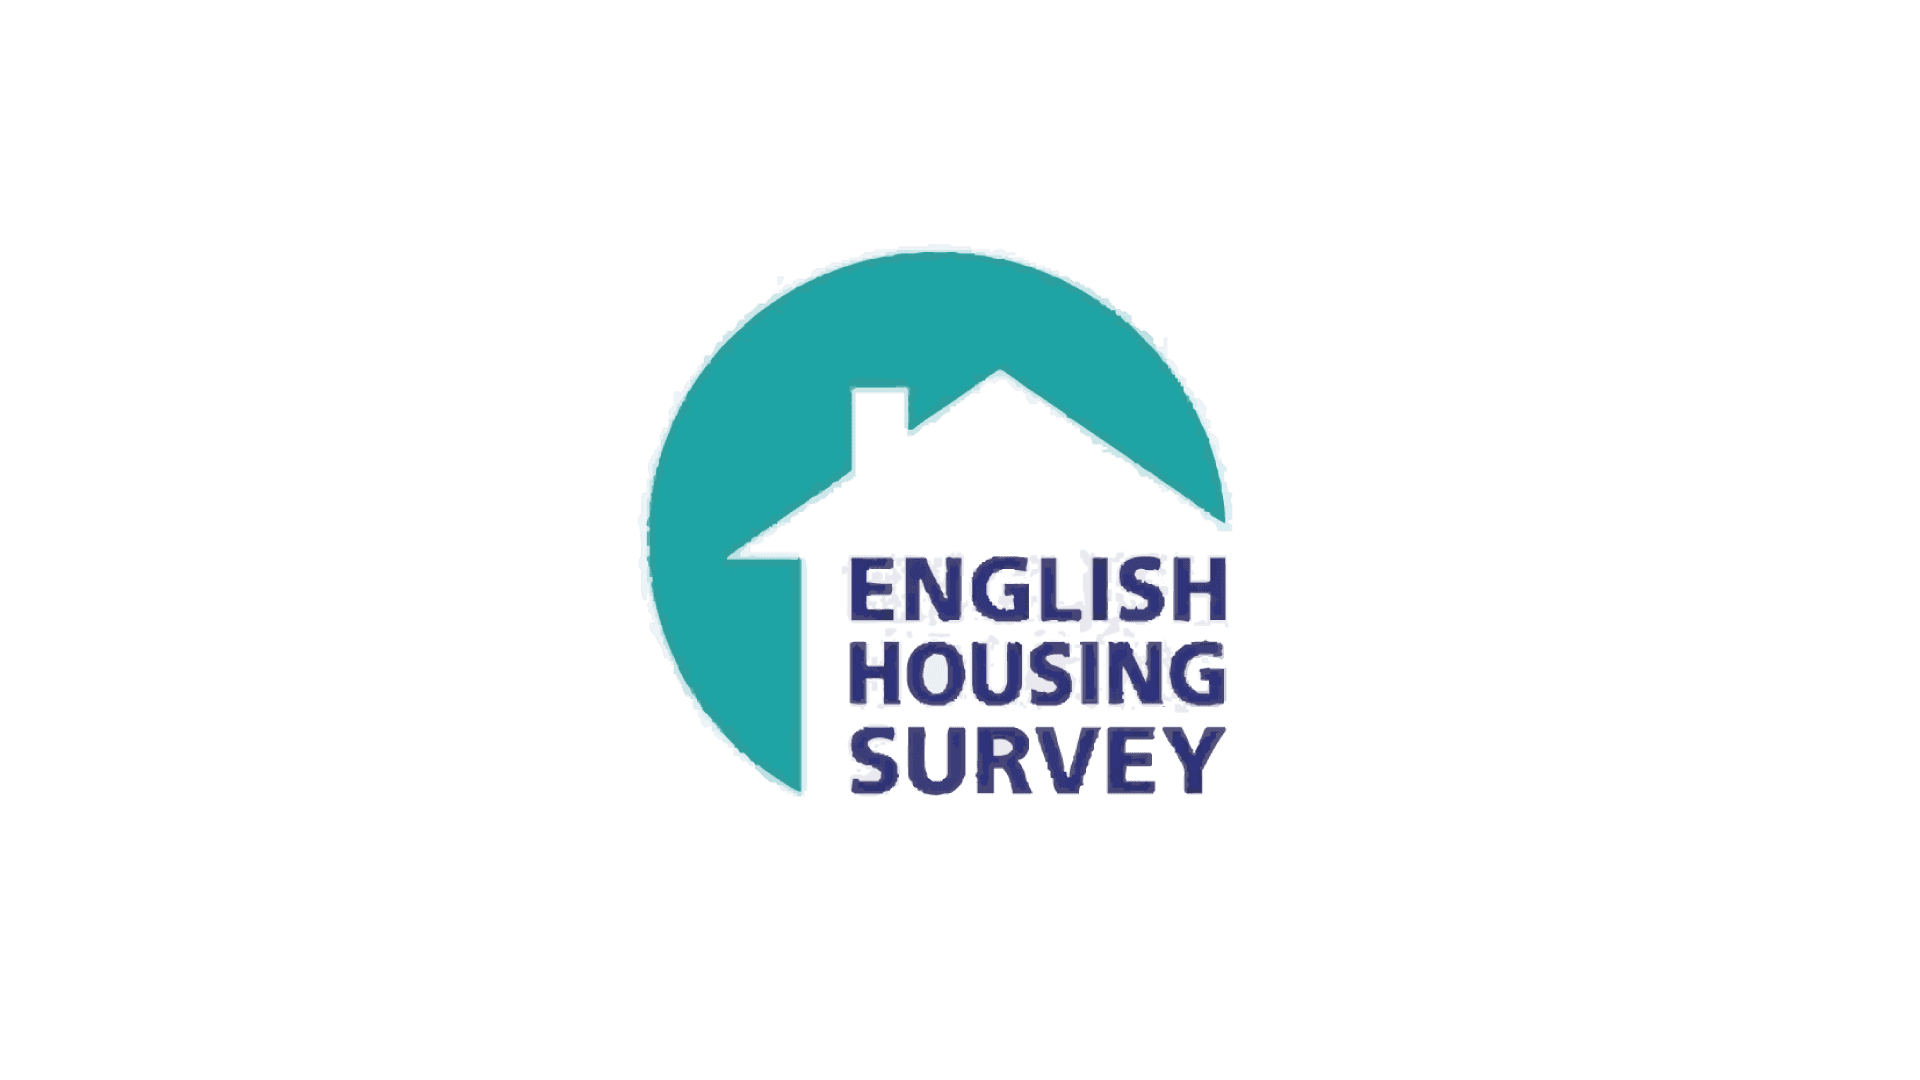 The English Housing Survey works with CADS